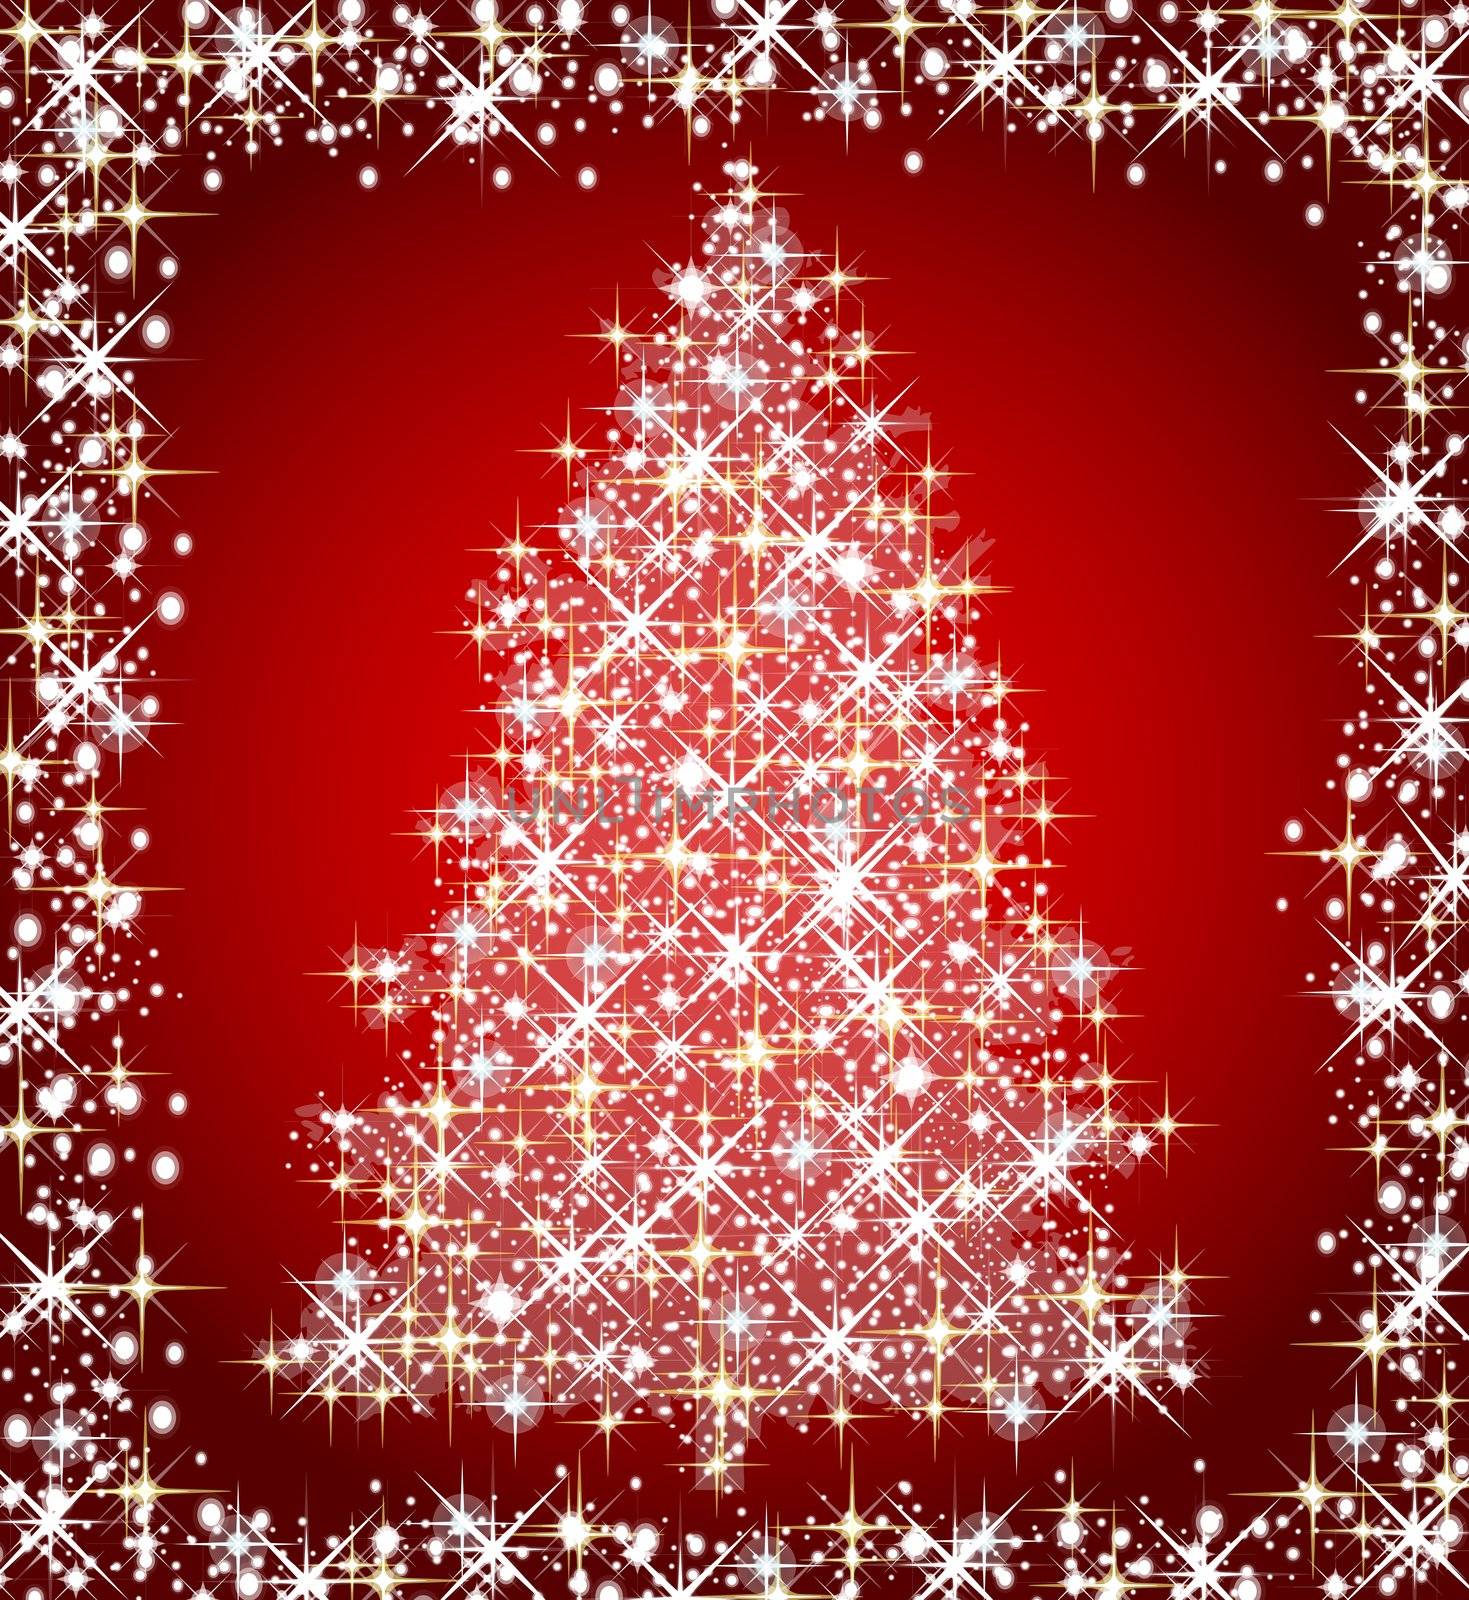 illustration of a christmas star tree on red background